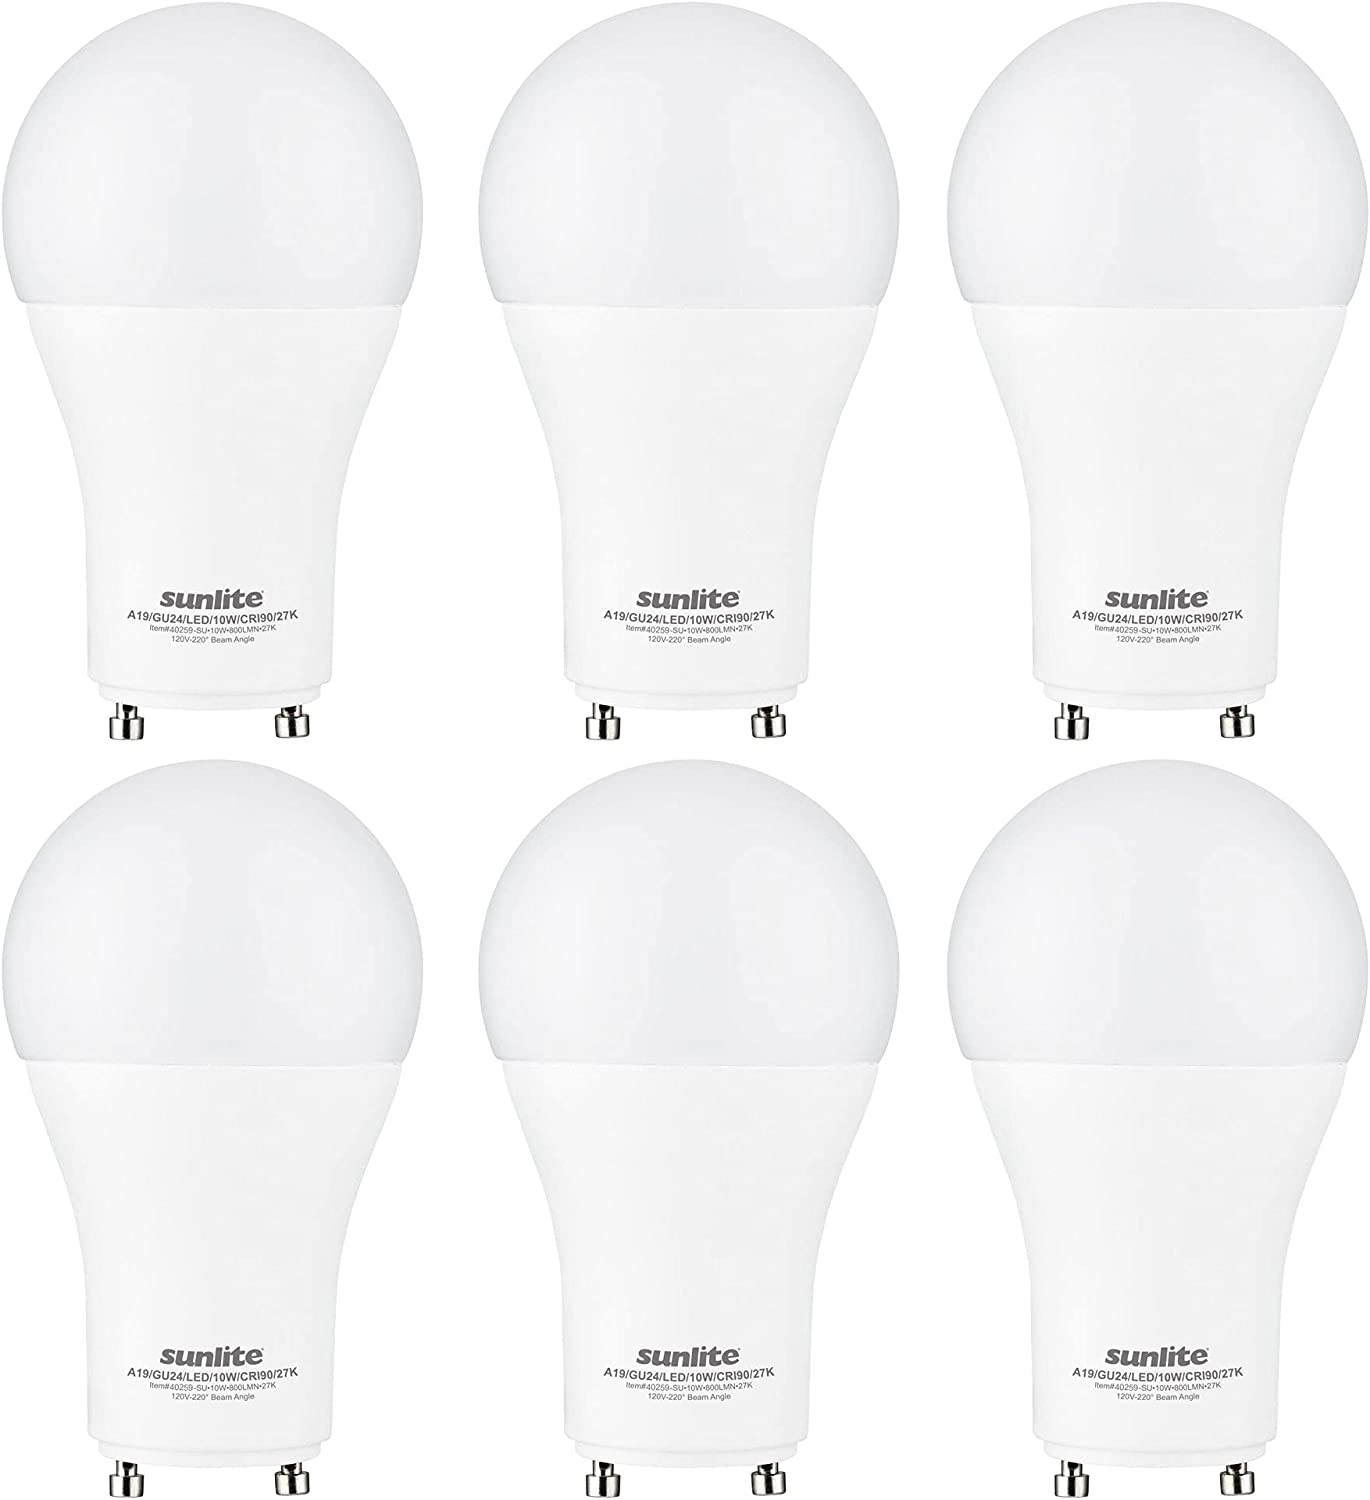 Sunlite 87973 LED A19 Light Bulb, 10 Watts (60W Equivalent), 800 Lumens, GU24 Twist and Lock Base, Dimmable, 90 CRI, UL Listed, Energy Star, Title 20 Compliant, 2700K Warm White, Pack of 6